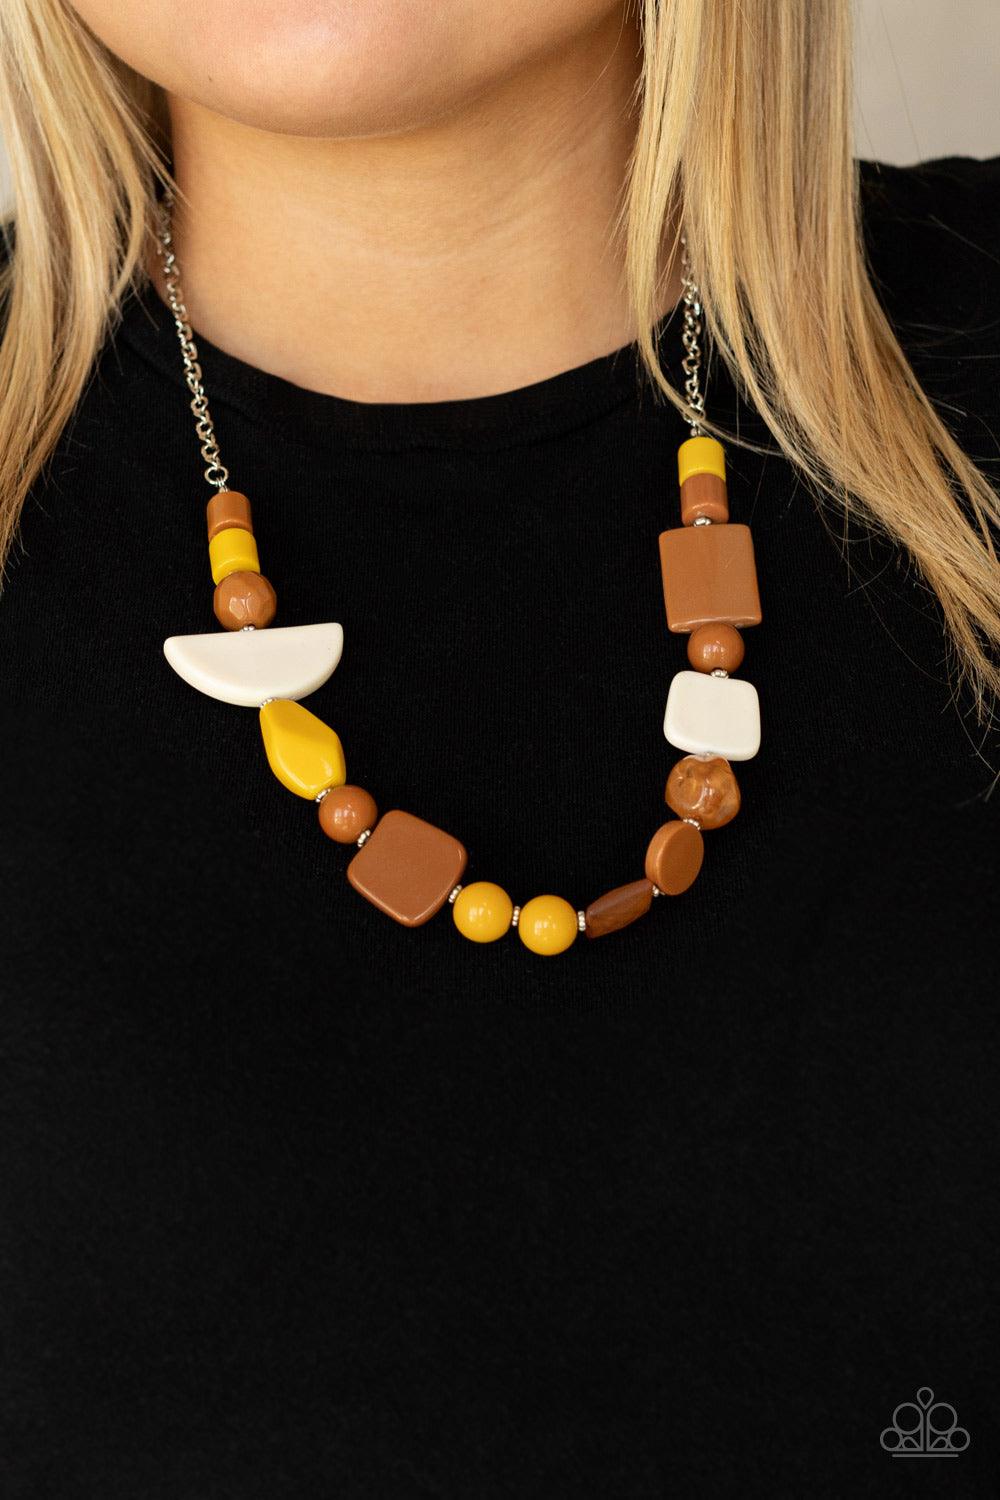 Paparazzi Accessories Tranquil Trendsetter - Yellow Featuring the rustic hues of Adobe, Mustard, and Soybean, mismatched acrylic and faux rock beads are haphazardly threaded along an invisible wire below the collar for an abstract artisan vibe. Features a